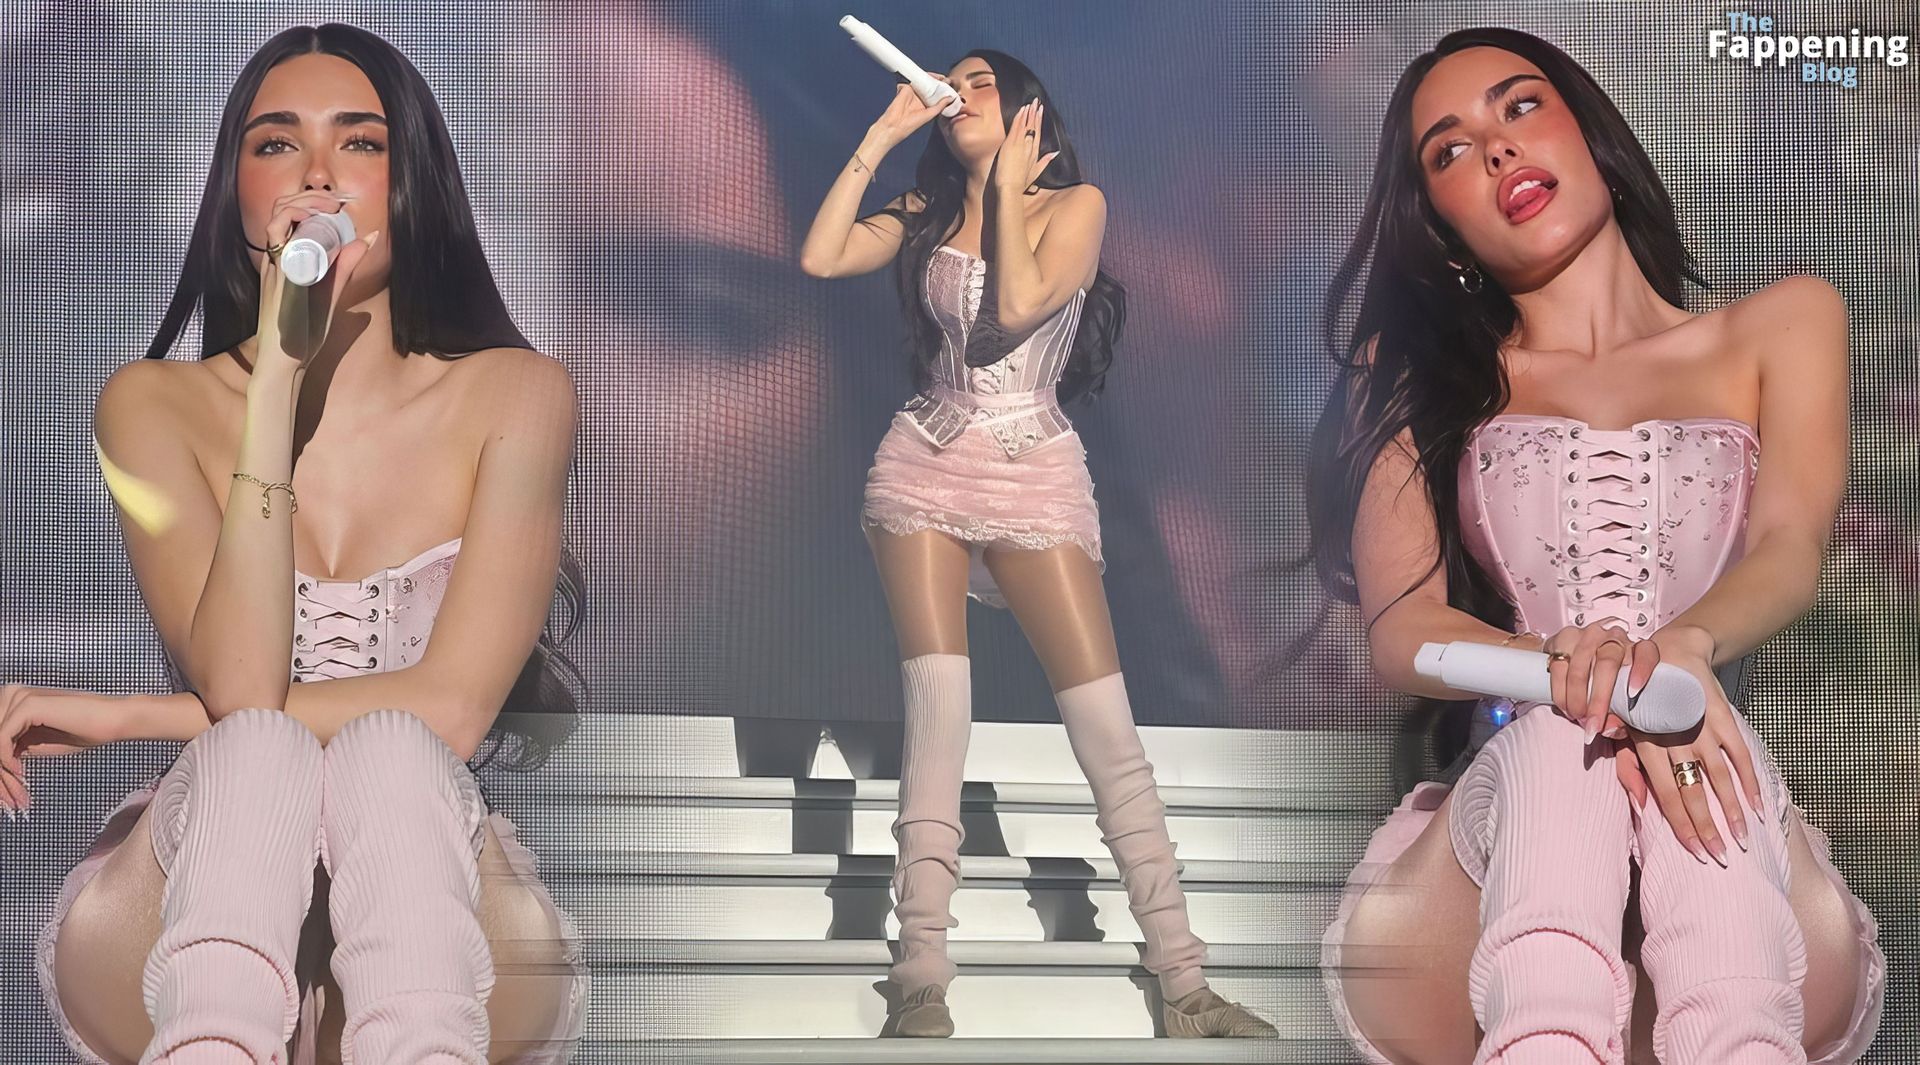 Madison-Beer-Sexy-on-Stage-2-thefappeningblog.com_.jpg